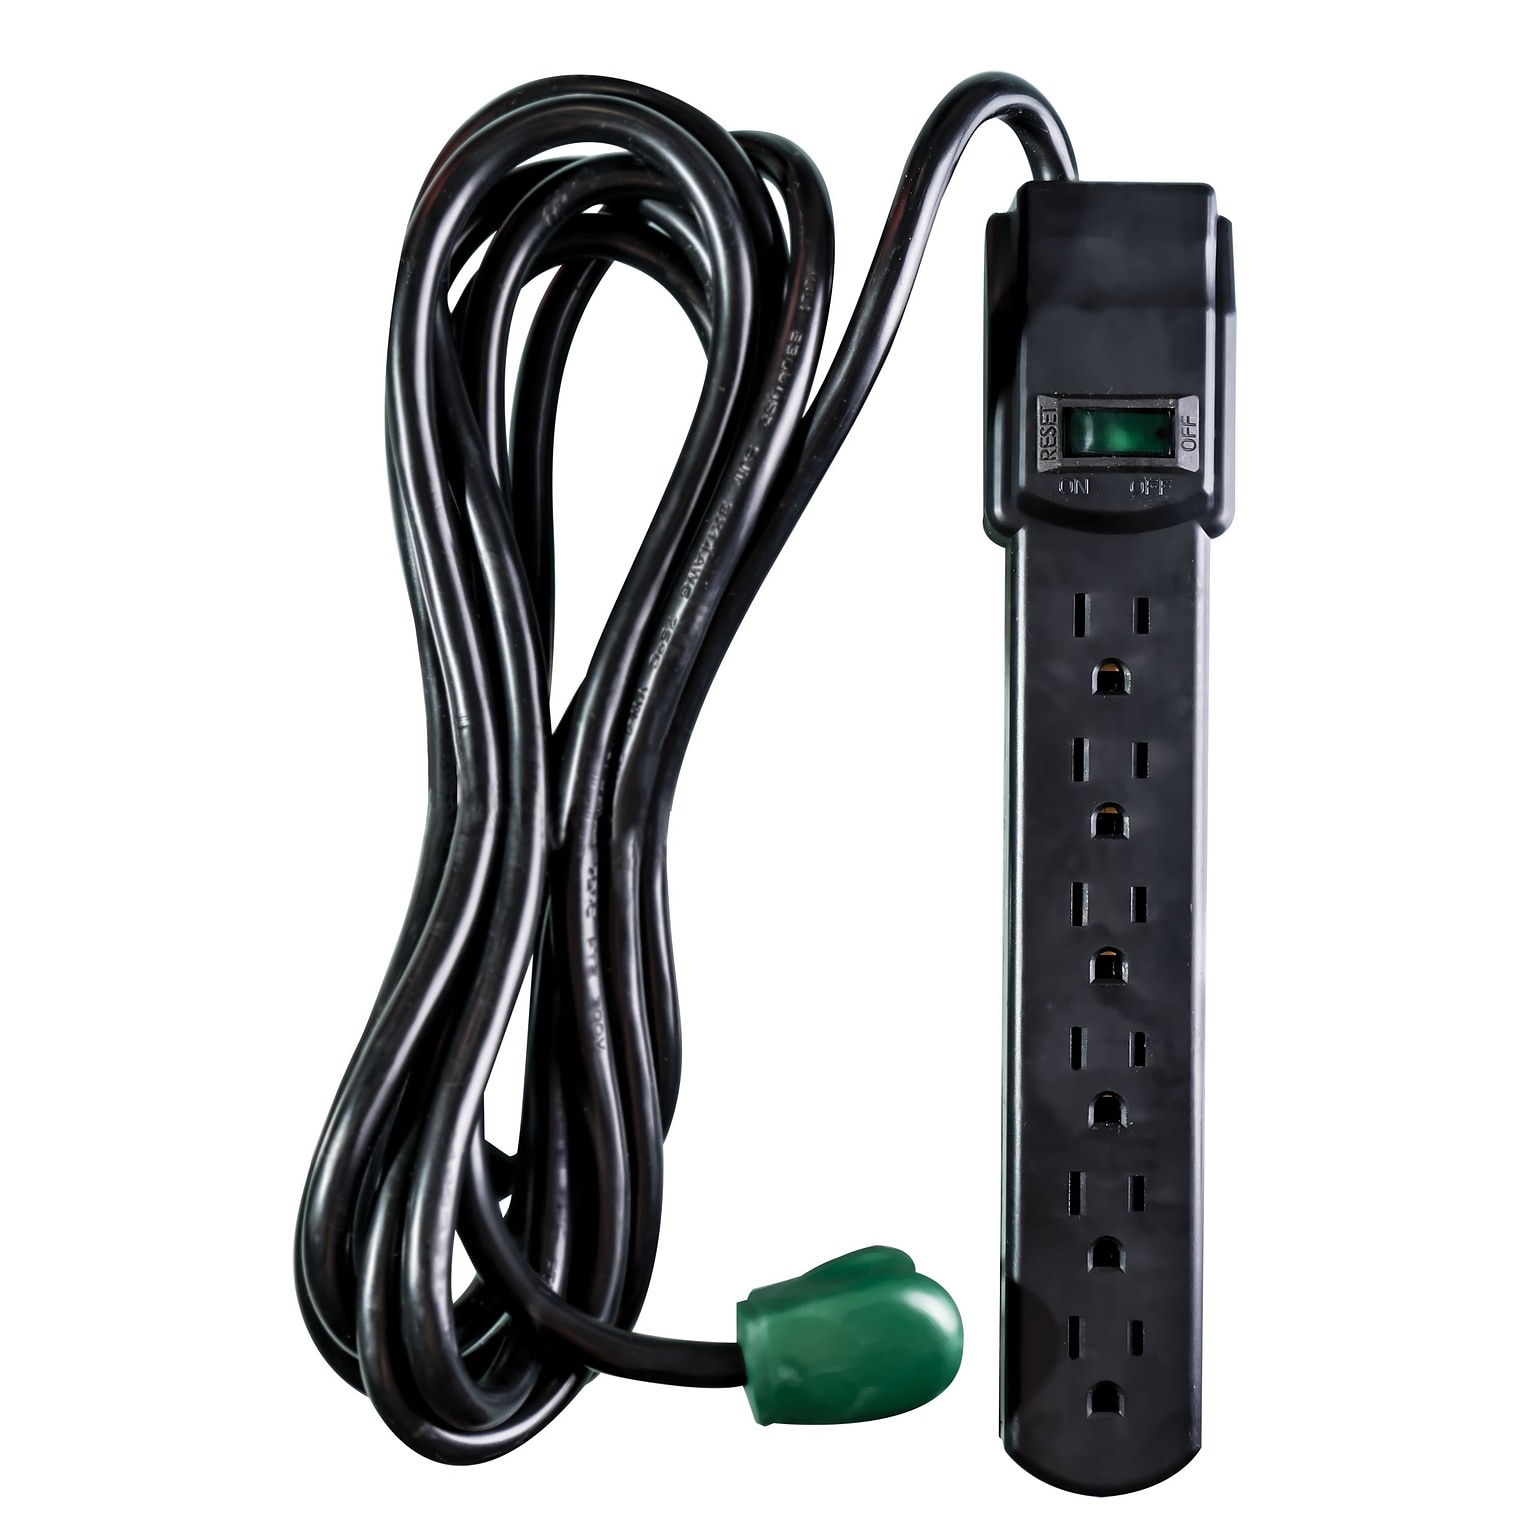 GoGreen Power 12 Surge Protector, 6 Outlet, Black (GG-16103M-12BK)